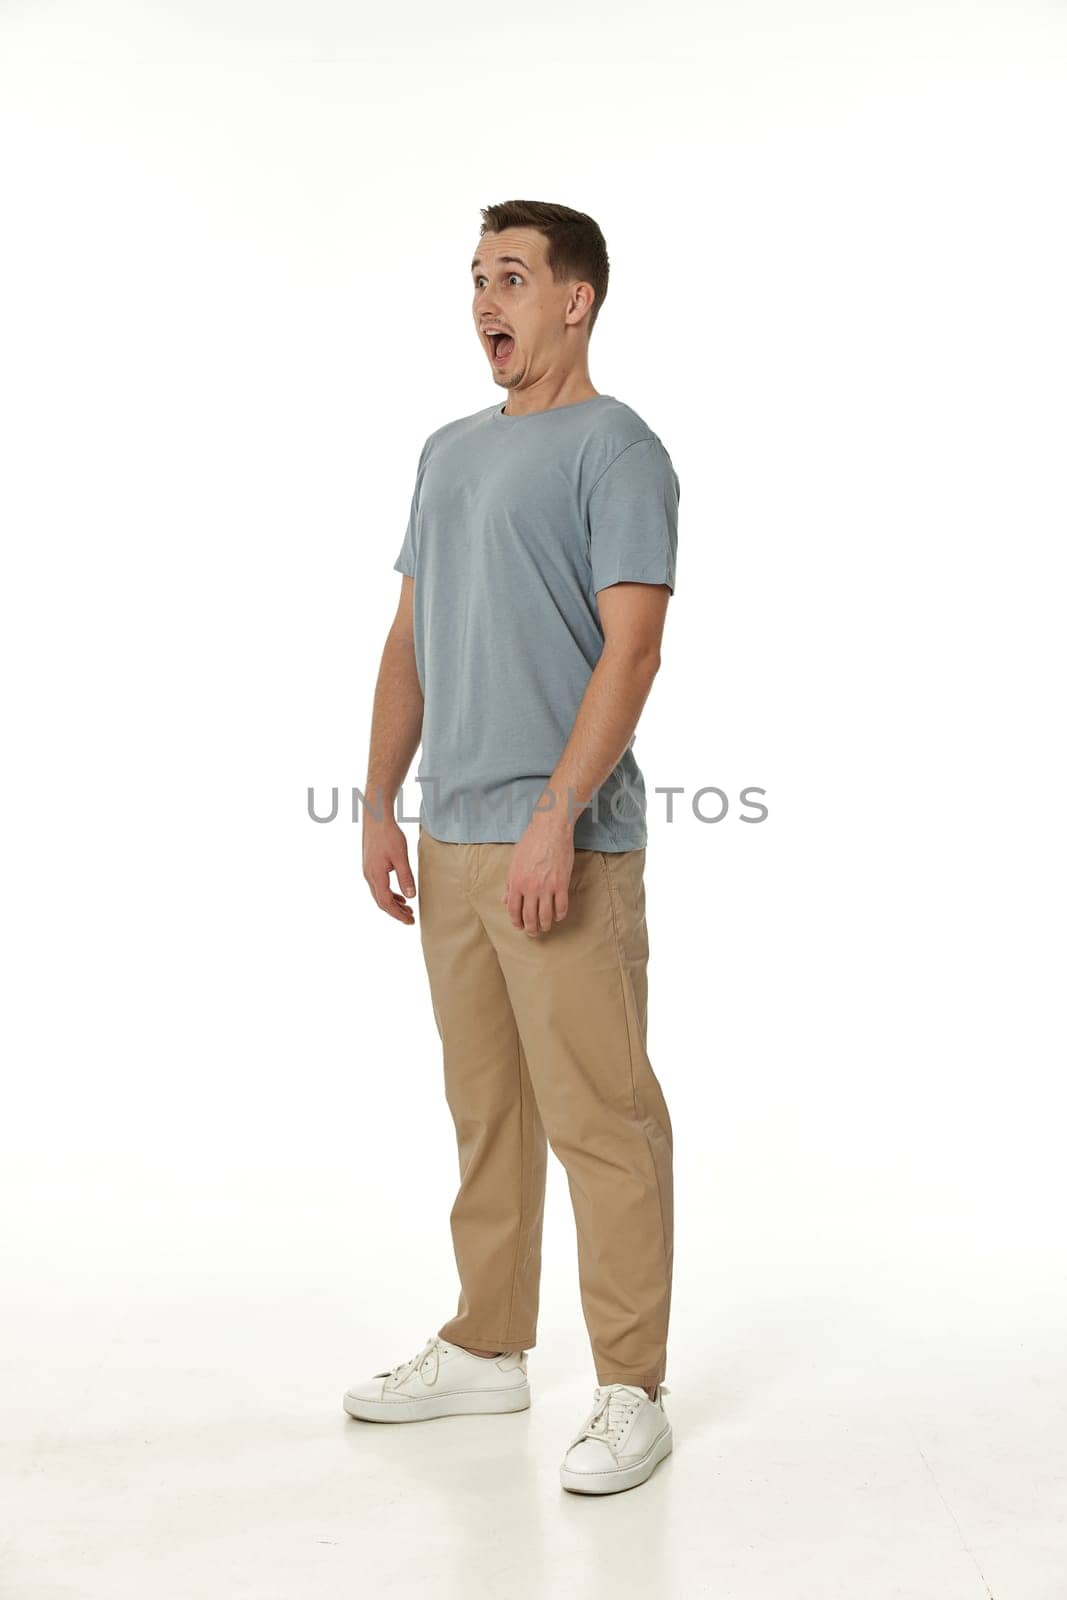 surprised guy looking at camera on white studio background